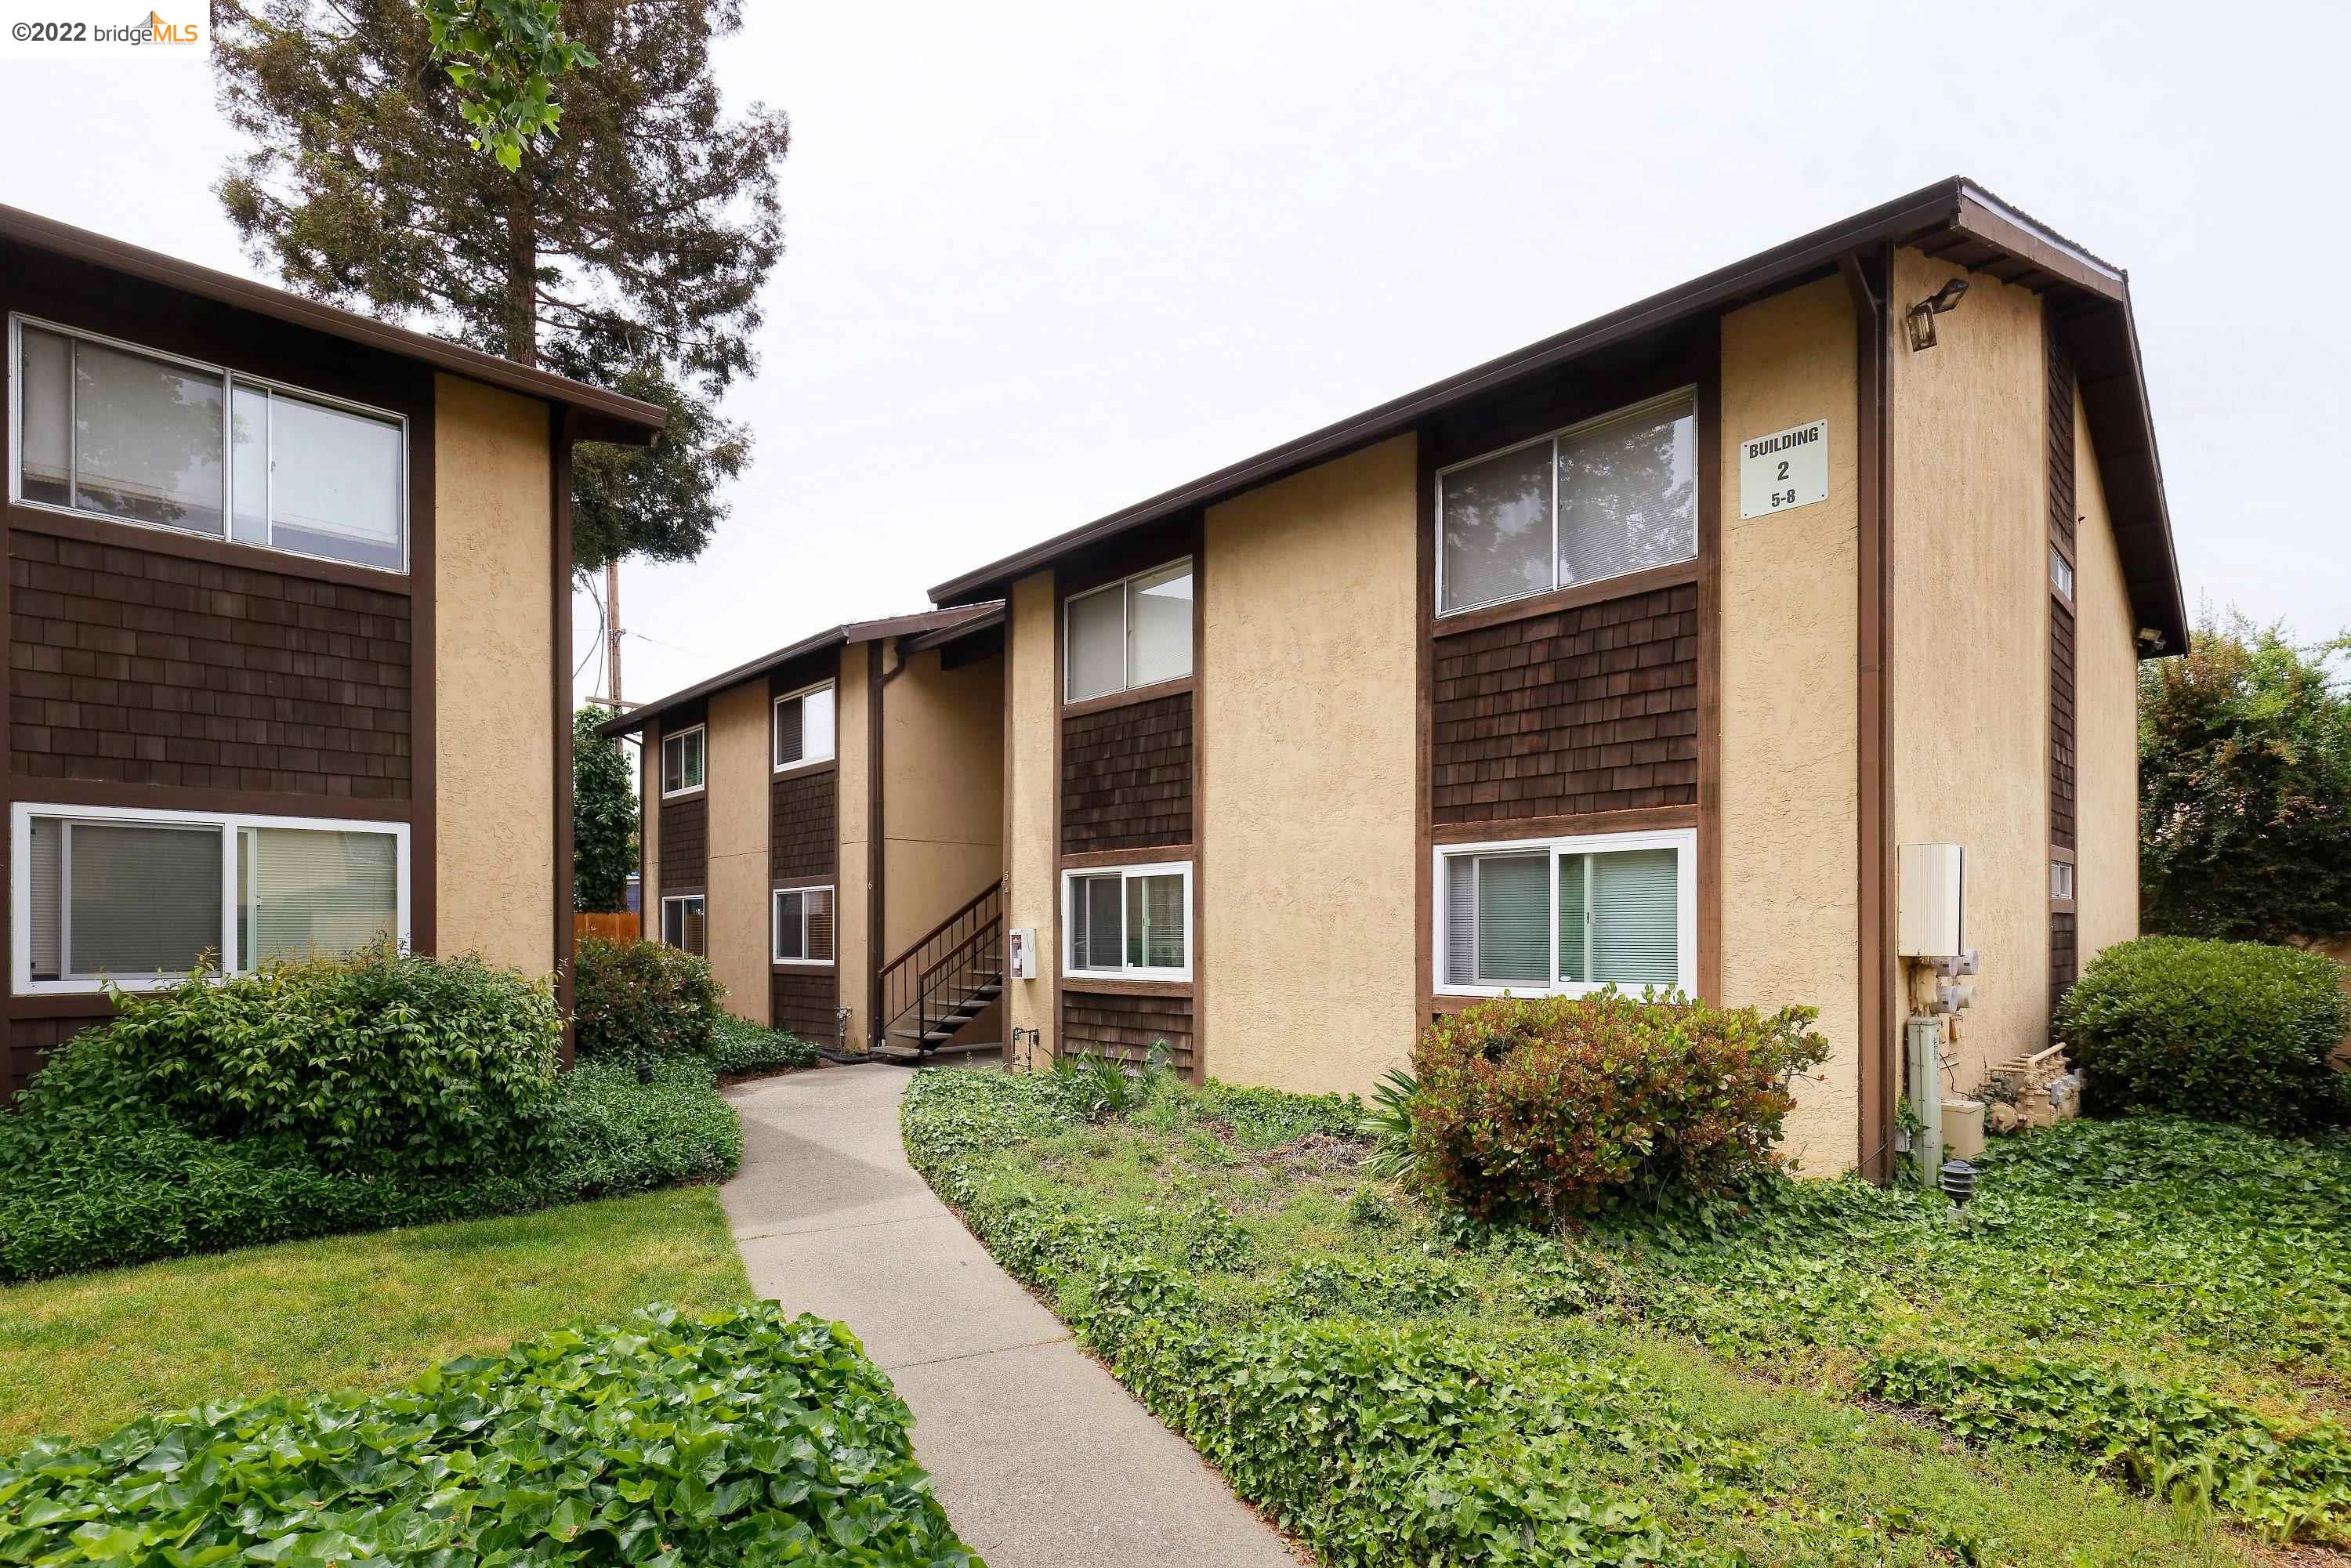 Located in Concord this first floor condo is in the heart of shops and transportation yet hidden in a small secluded condo complex at the end of the court. Features include, 2 bedrooms, 1 bath (with double sink), inside washer and dryer connection, private patio, updated kitchen features, newer floors new paint and double pane windows.